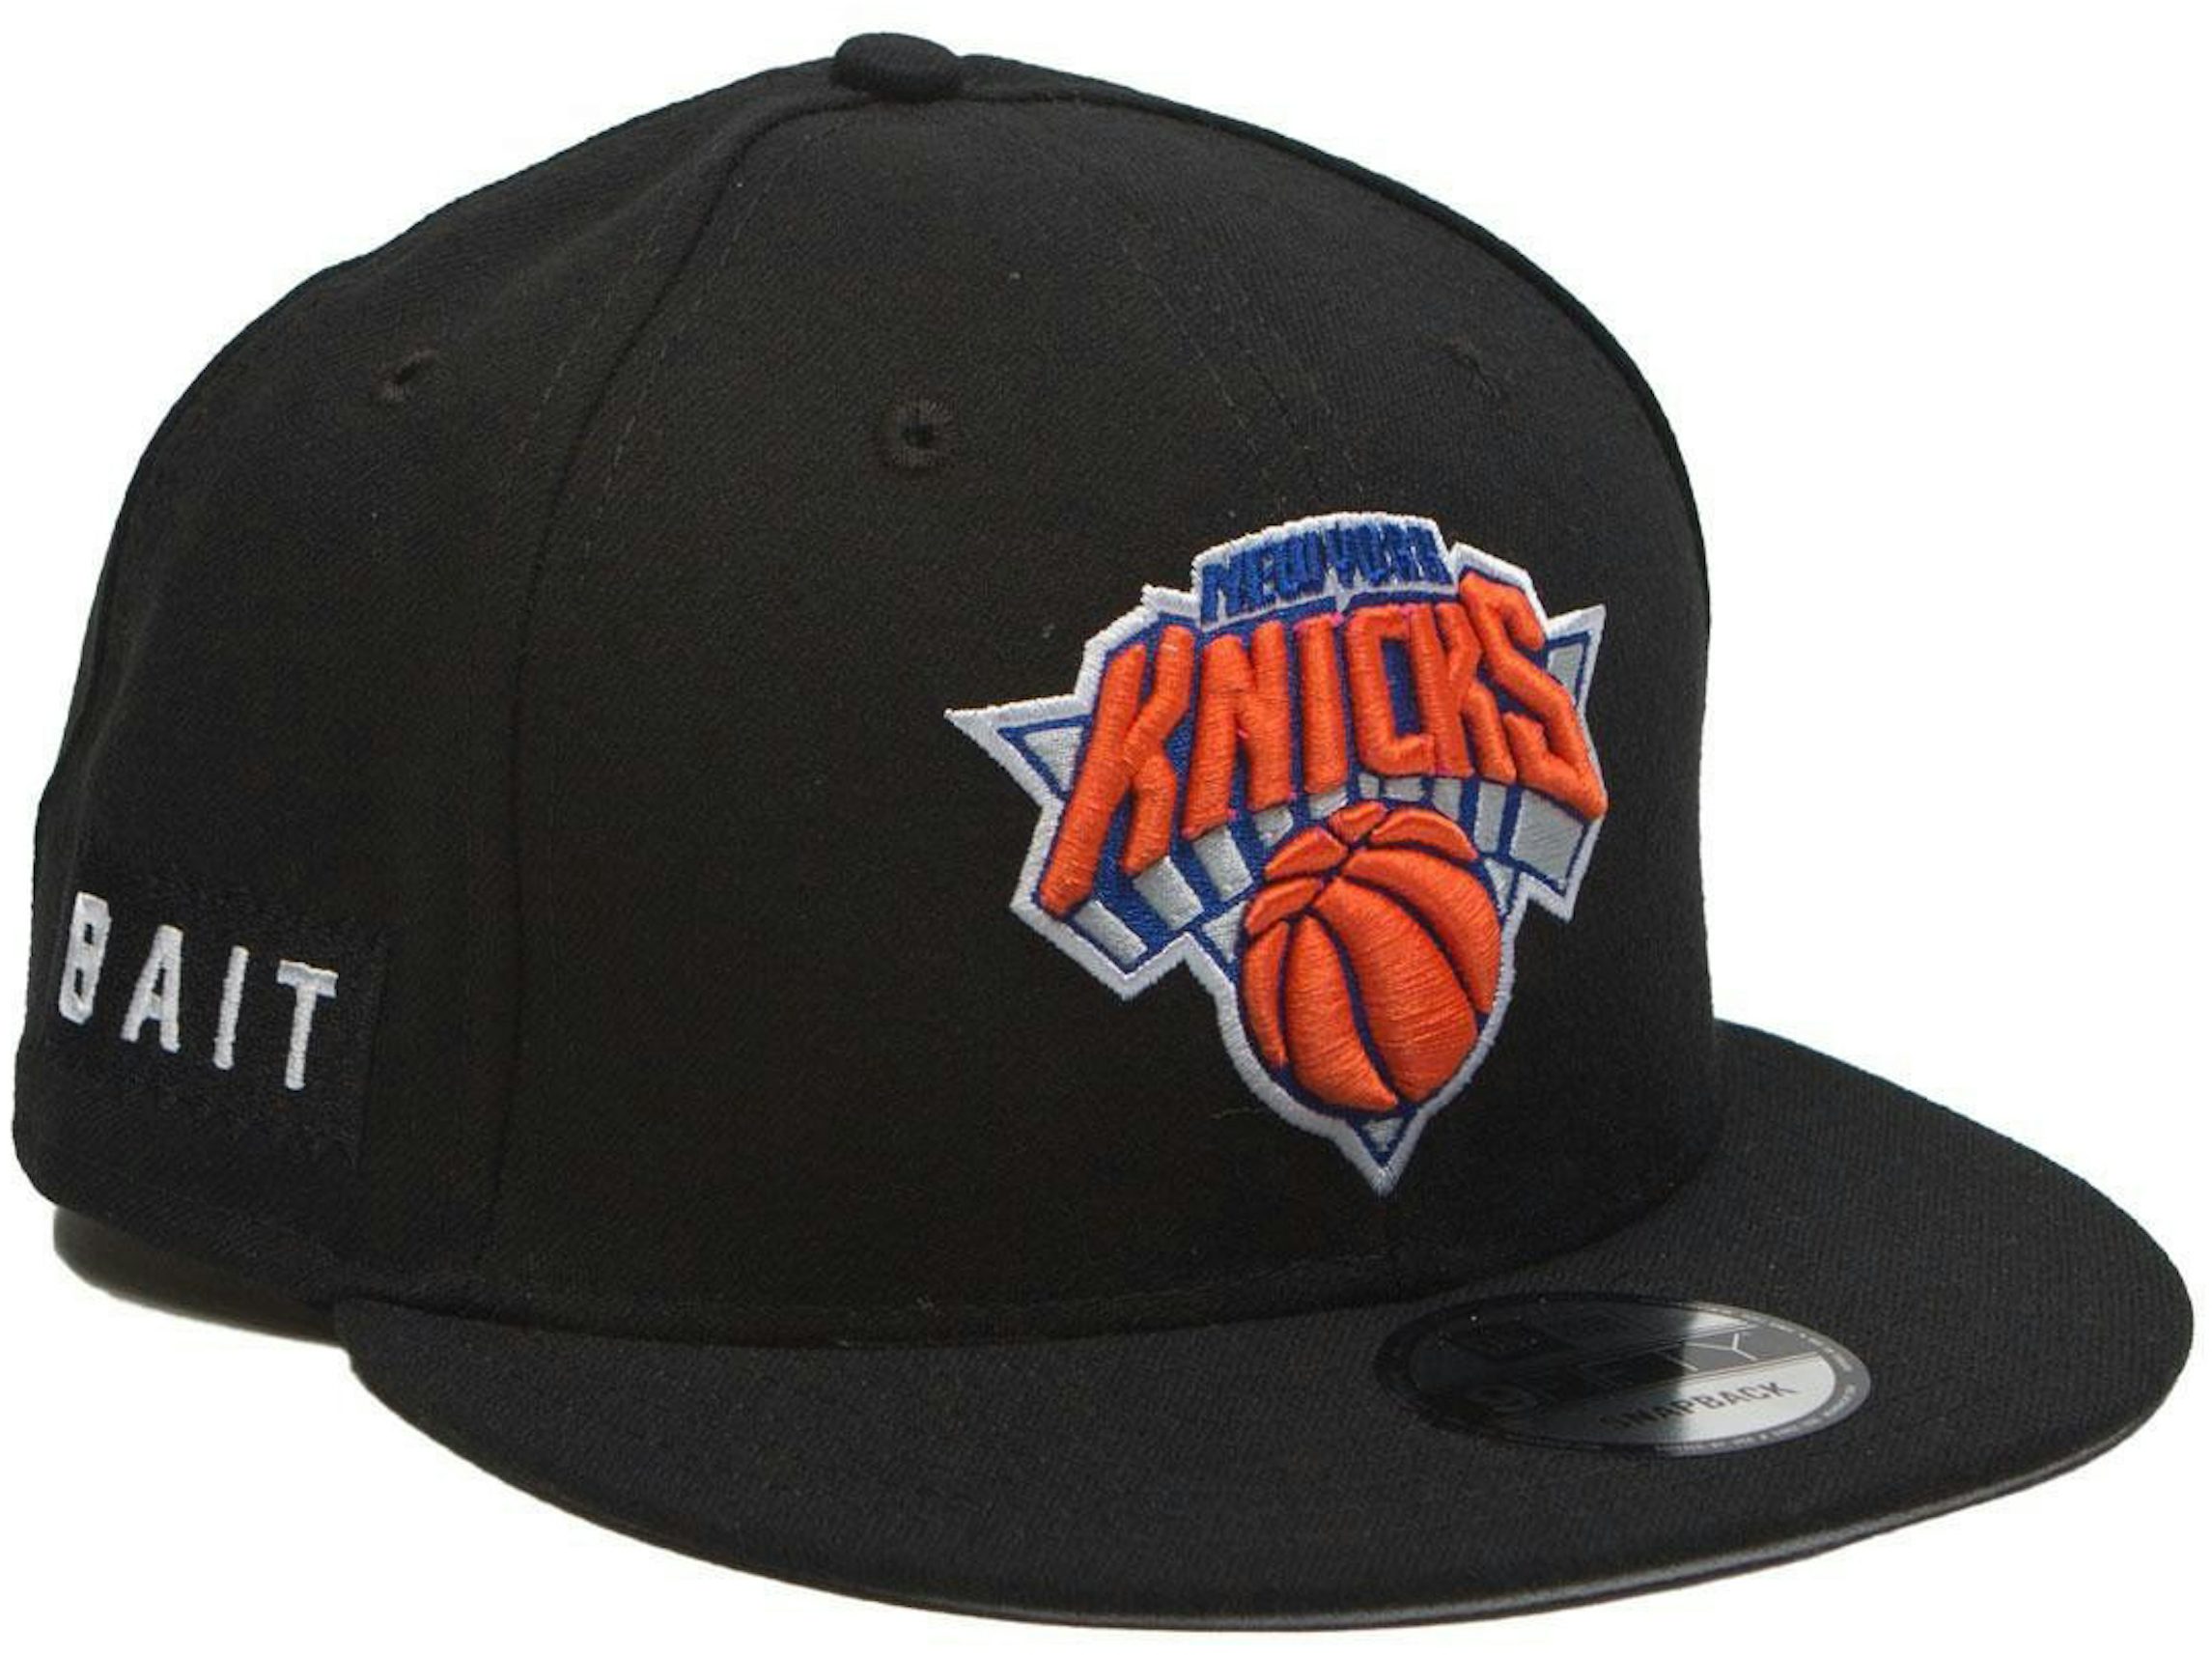 New Era Denver Nuggets Chrome Black Navy Two Tone Edition 59Fifty Fitted Hat, EXCLUSIVE HATS, CAPS